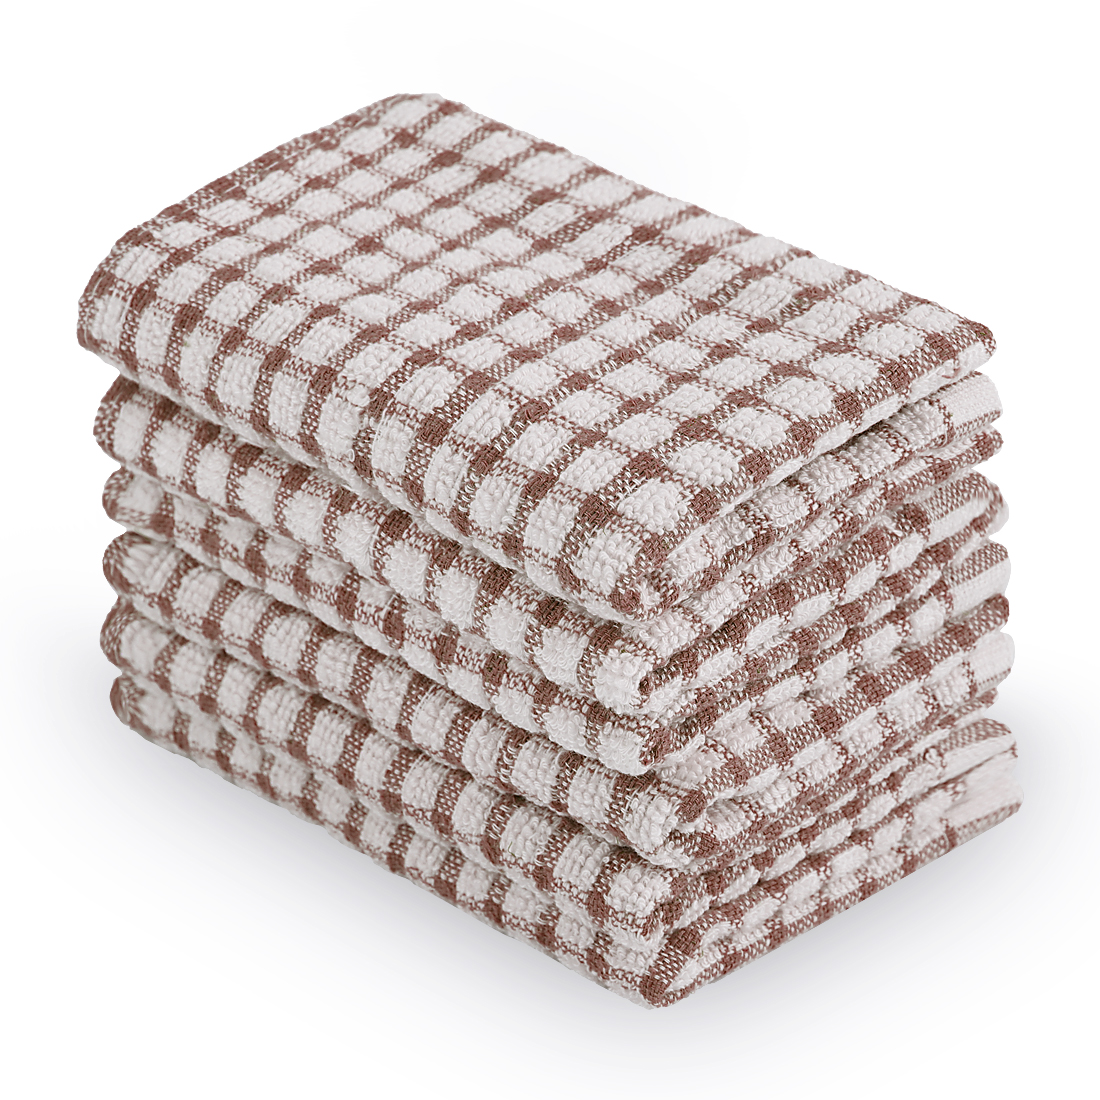 REGALWOVEN 6Pcs Kitchen Restaurant Hotel Terry Cotton Dish Cleaning Towels, Coffee 10.5"x15" - image 2 of 6